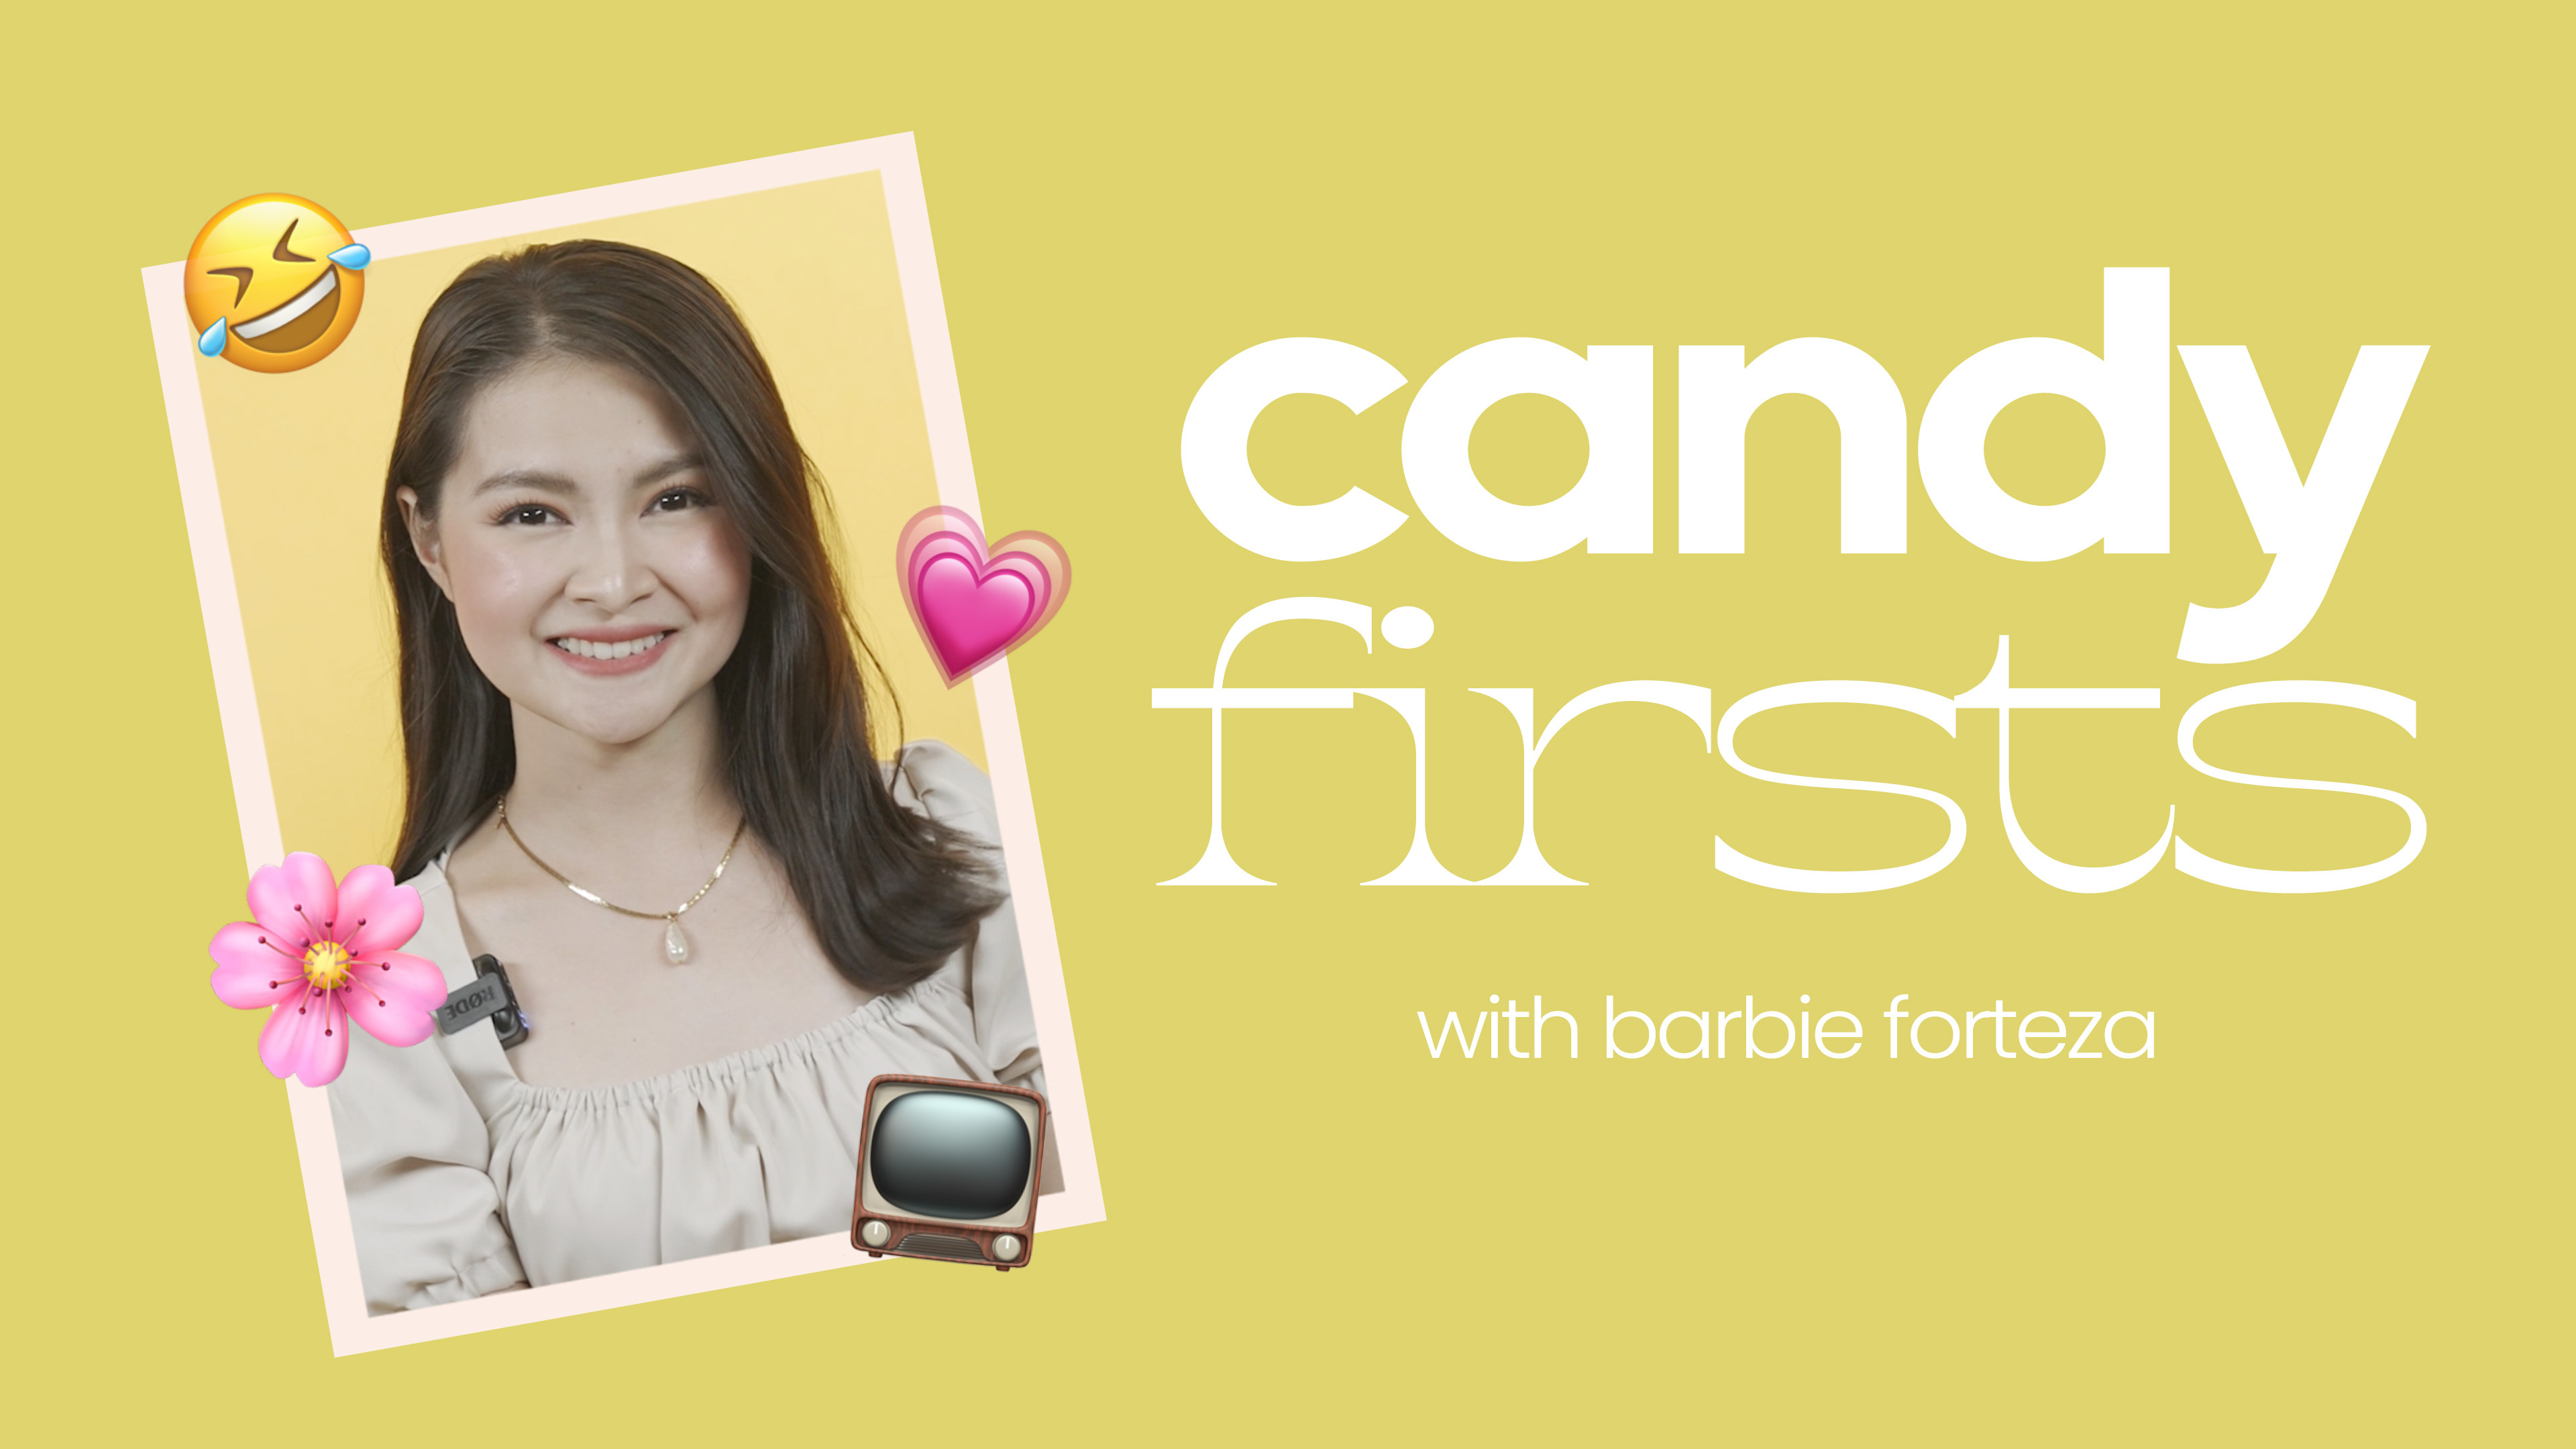 Did You Know? Barbie Forteza and Kristoffer Martin are Actually Childhood Friends